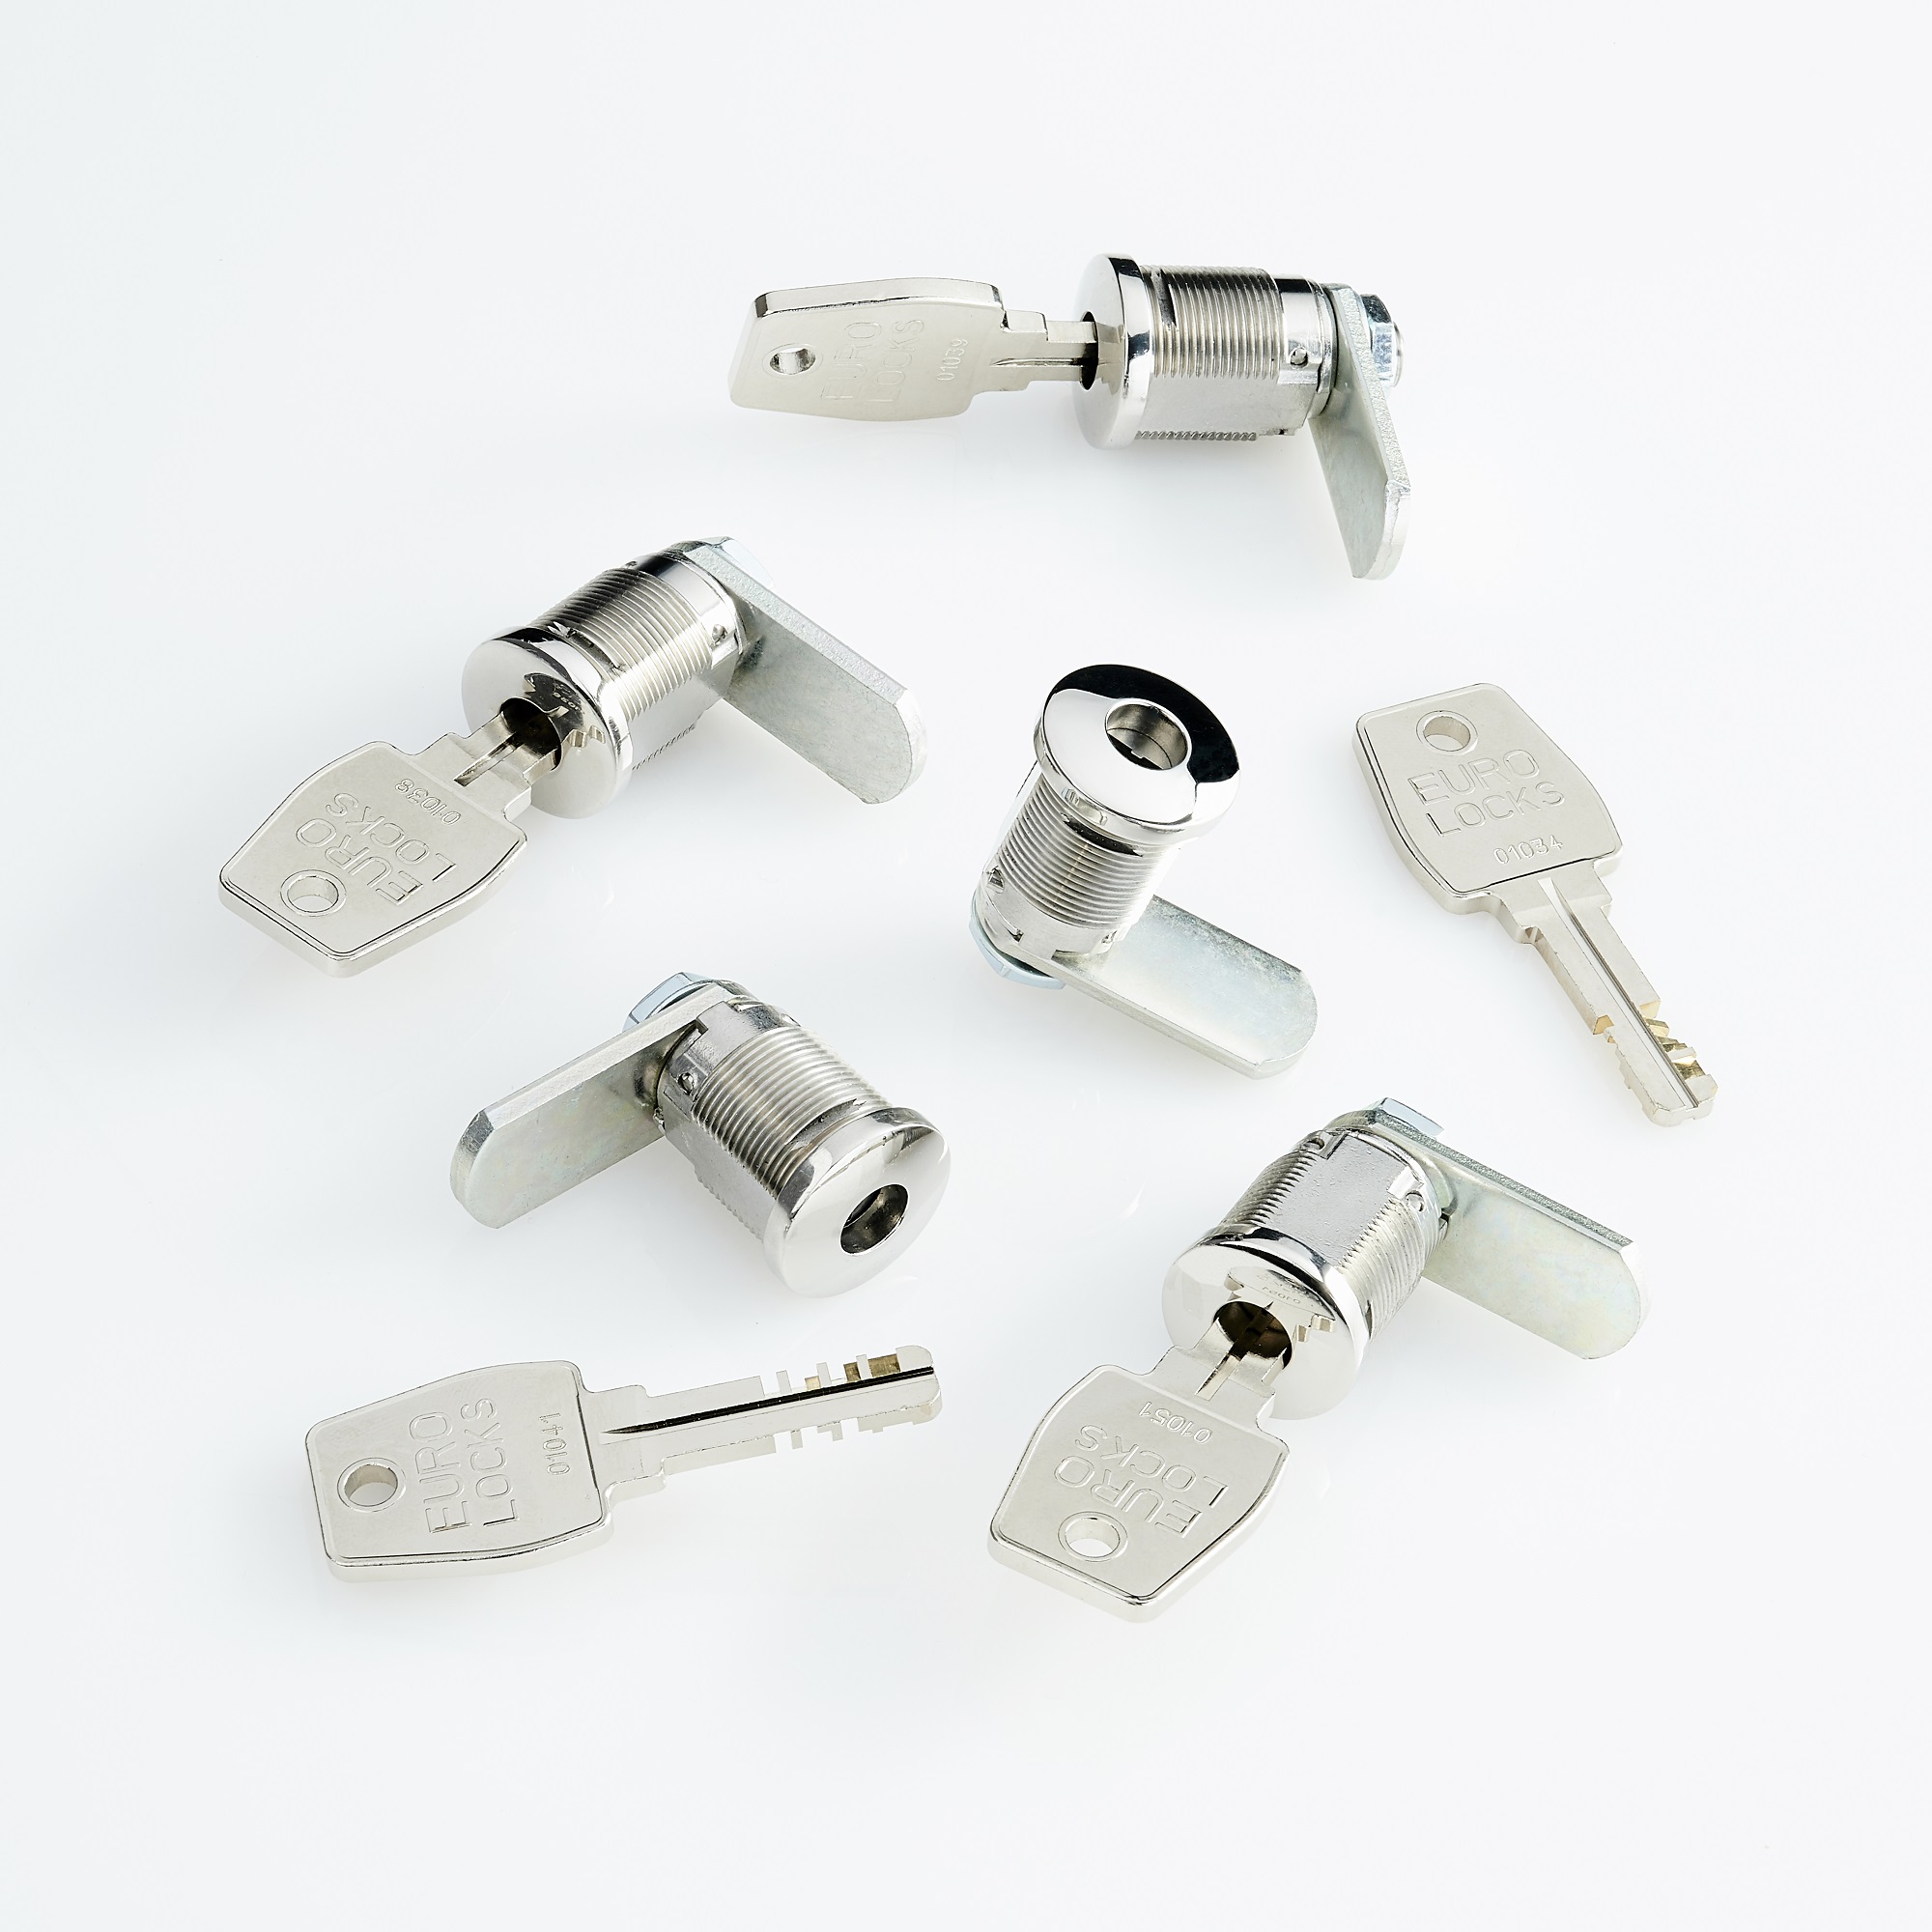 High Security Lock range now available from Lowe & Fletcher Inc